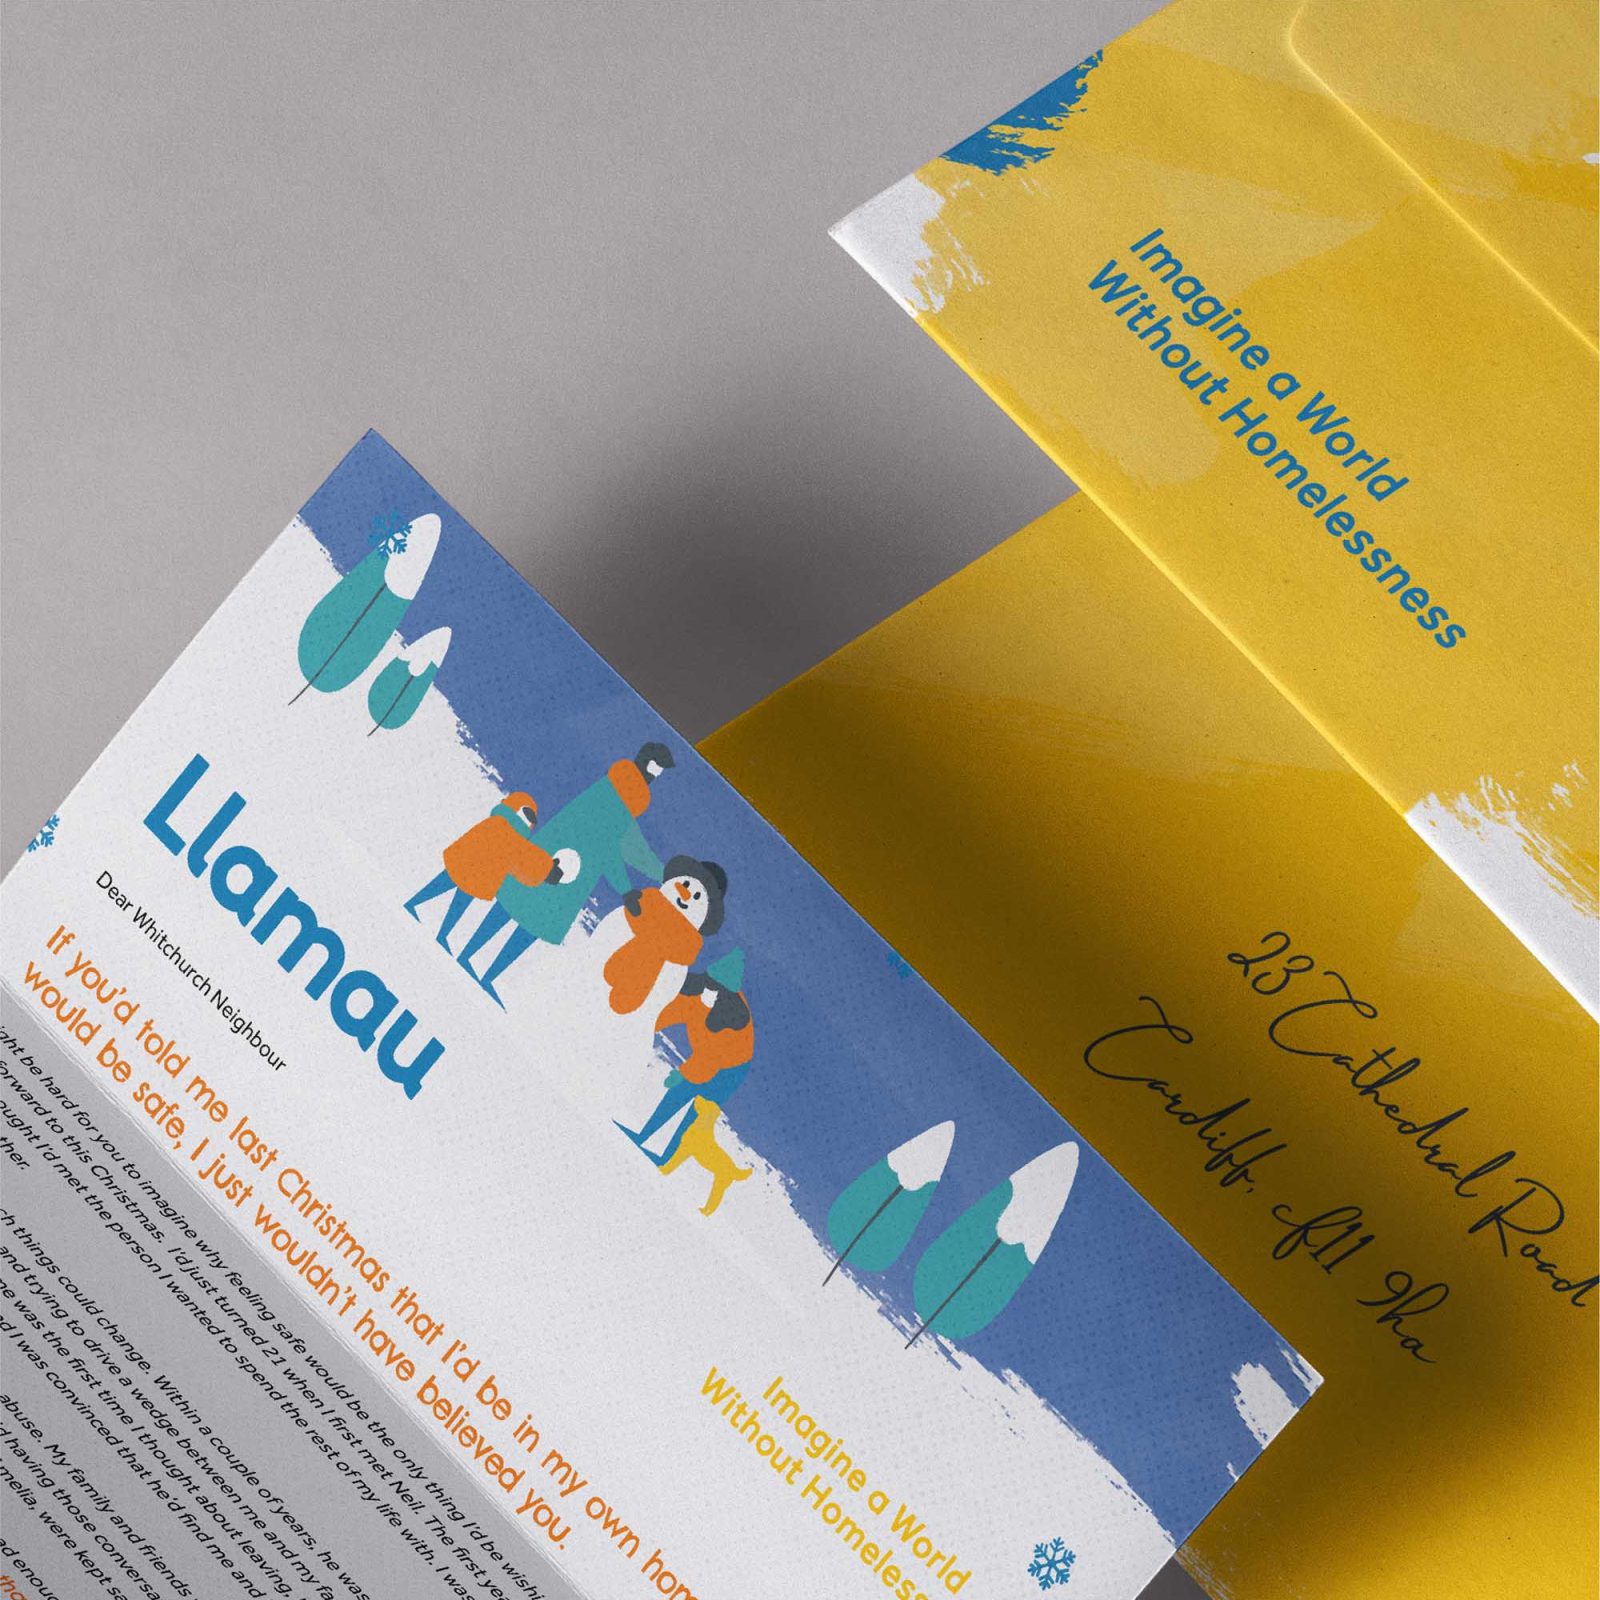 A promotional flyer for Llamau, a design agency addressing homelessness, displayed partially underneath a golden envelope. The visible part includes cartoon illustrations of people and descriptive text.